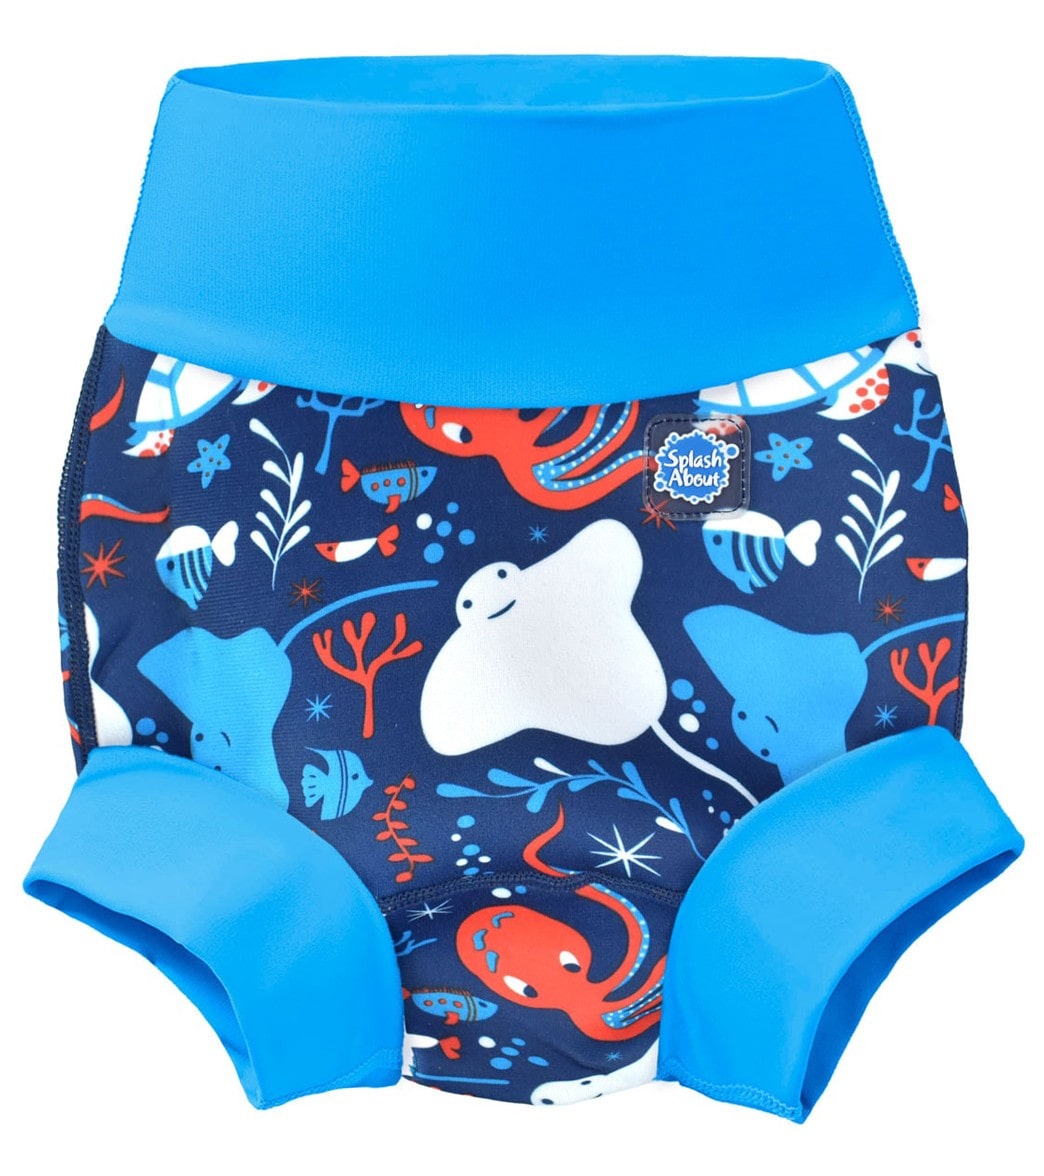 Splash About Under The Sea Happy Nappy Swim Diaper Baby - The Small 0-3 Months - Swimoutlet.com